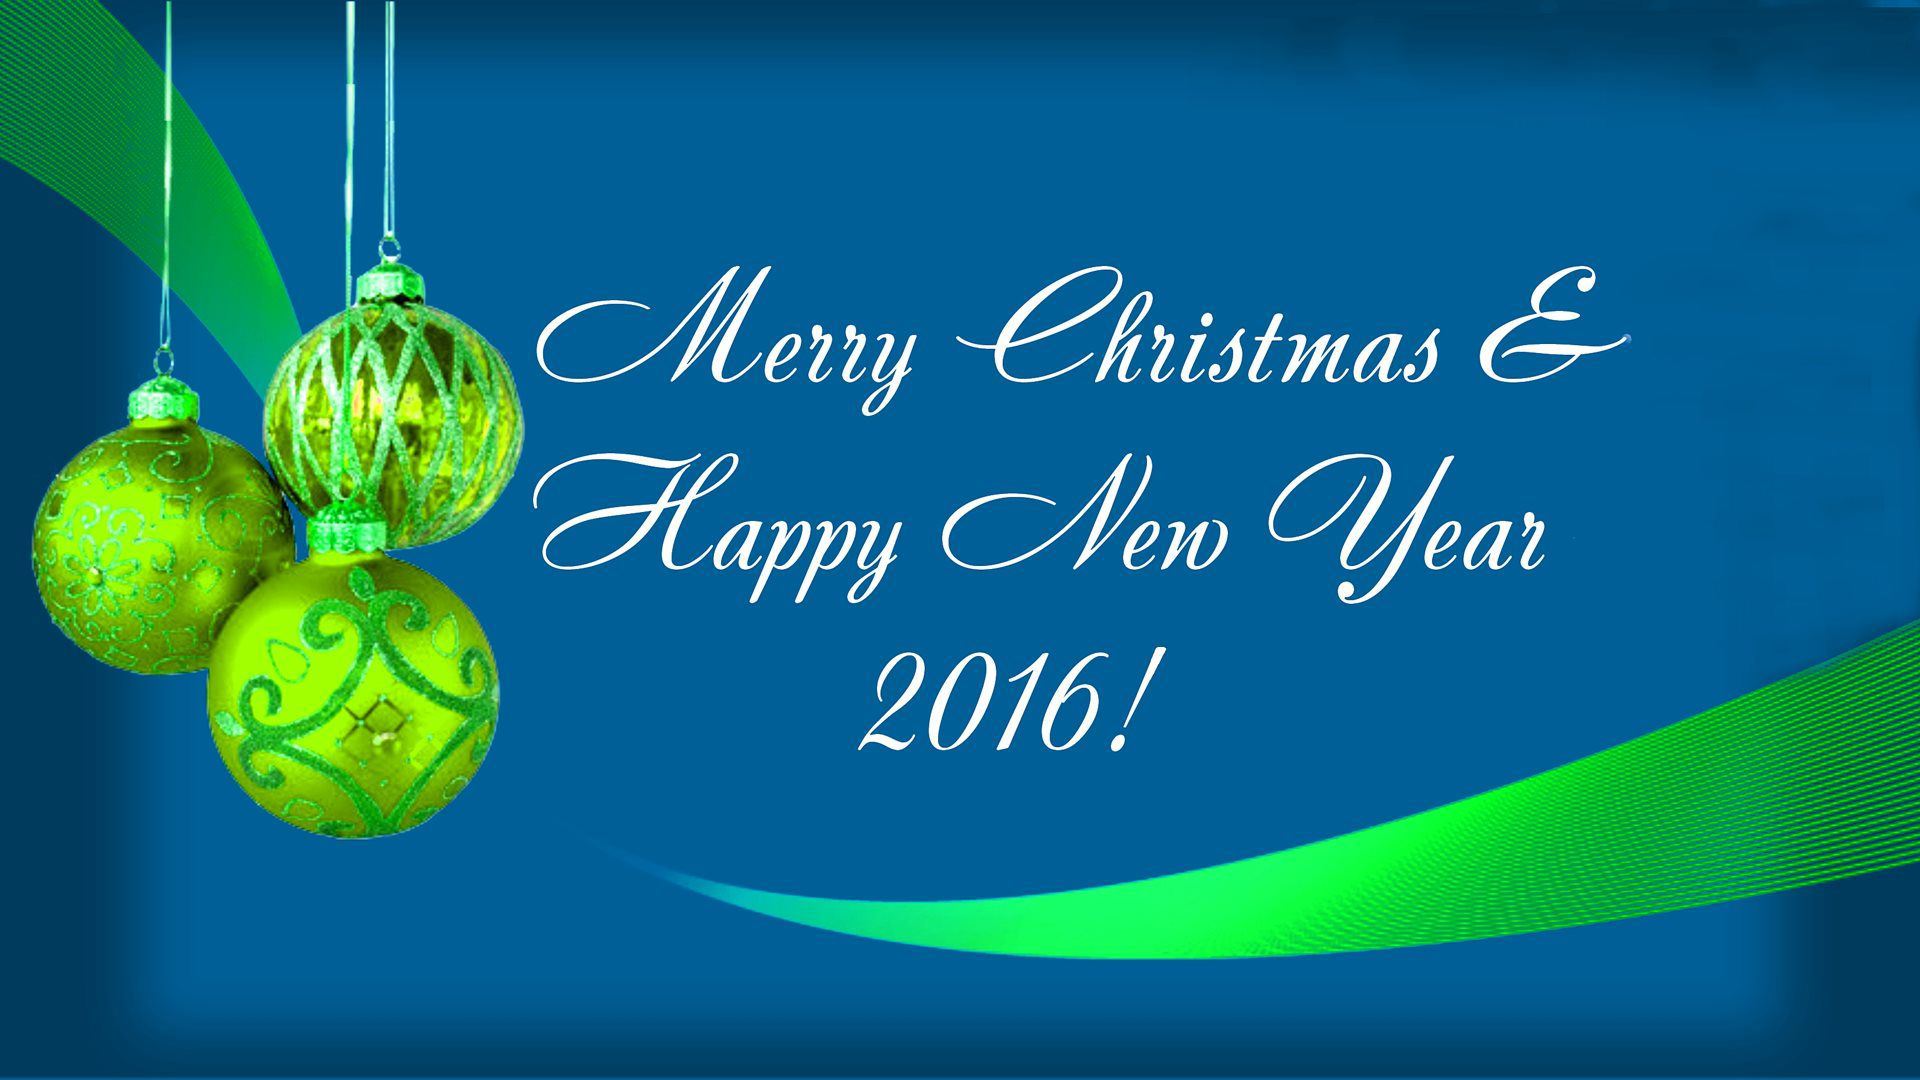 Download Merry Christmas And Happy New Year 2016 HD Wallpaper One